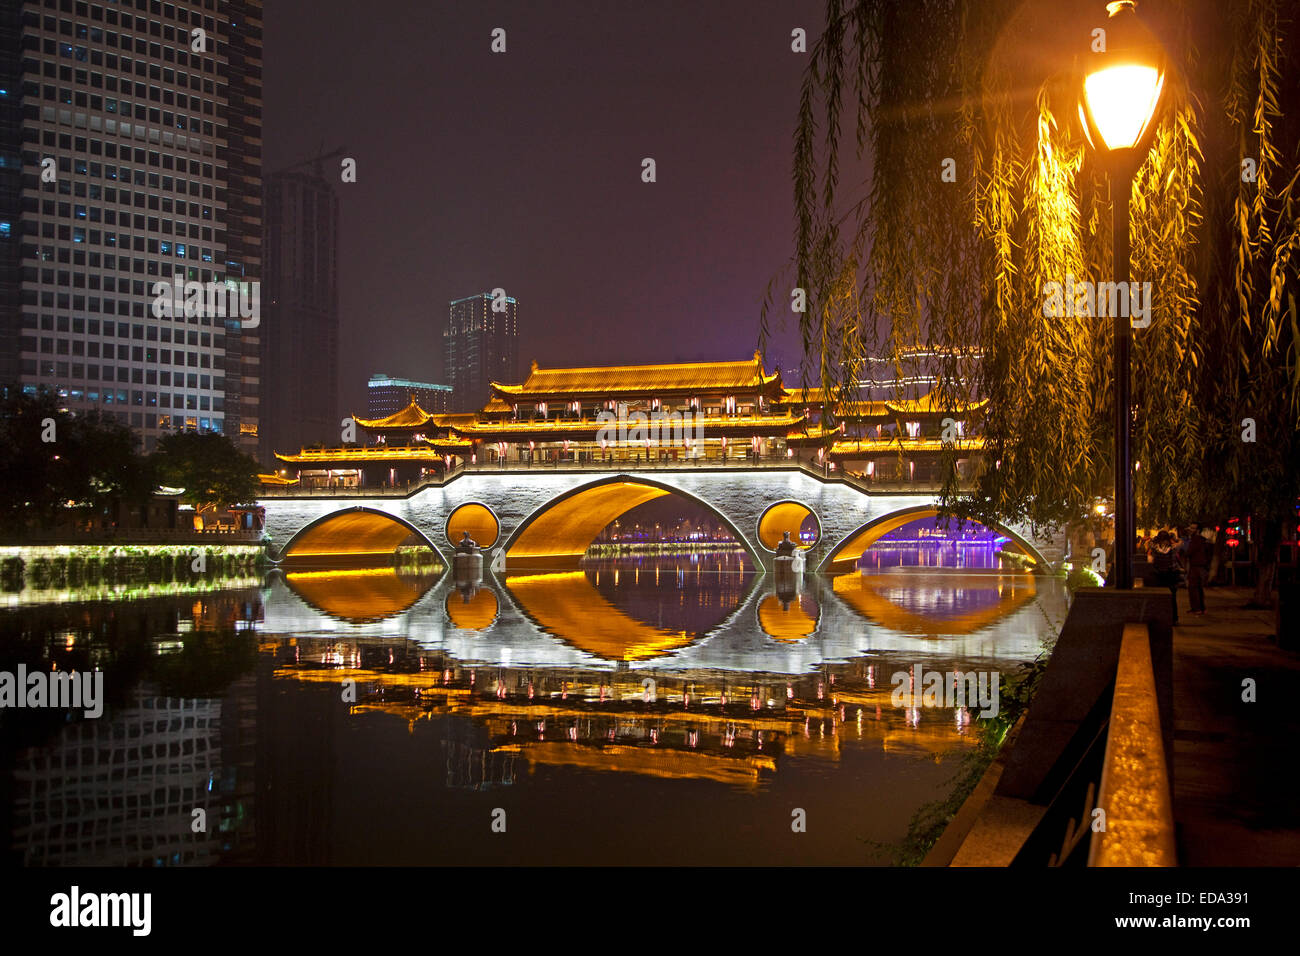 Illuminated Anshun Bridge over the the Jin River at night in the provincial capital of Chengdu in Sichuan, China Stock Photo